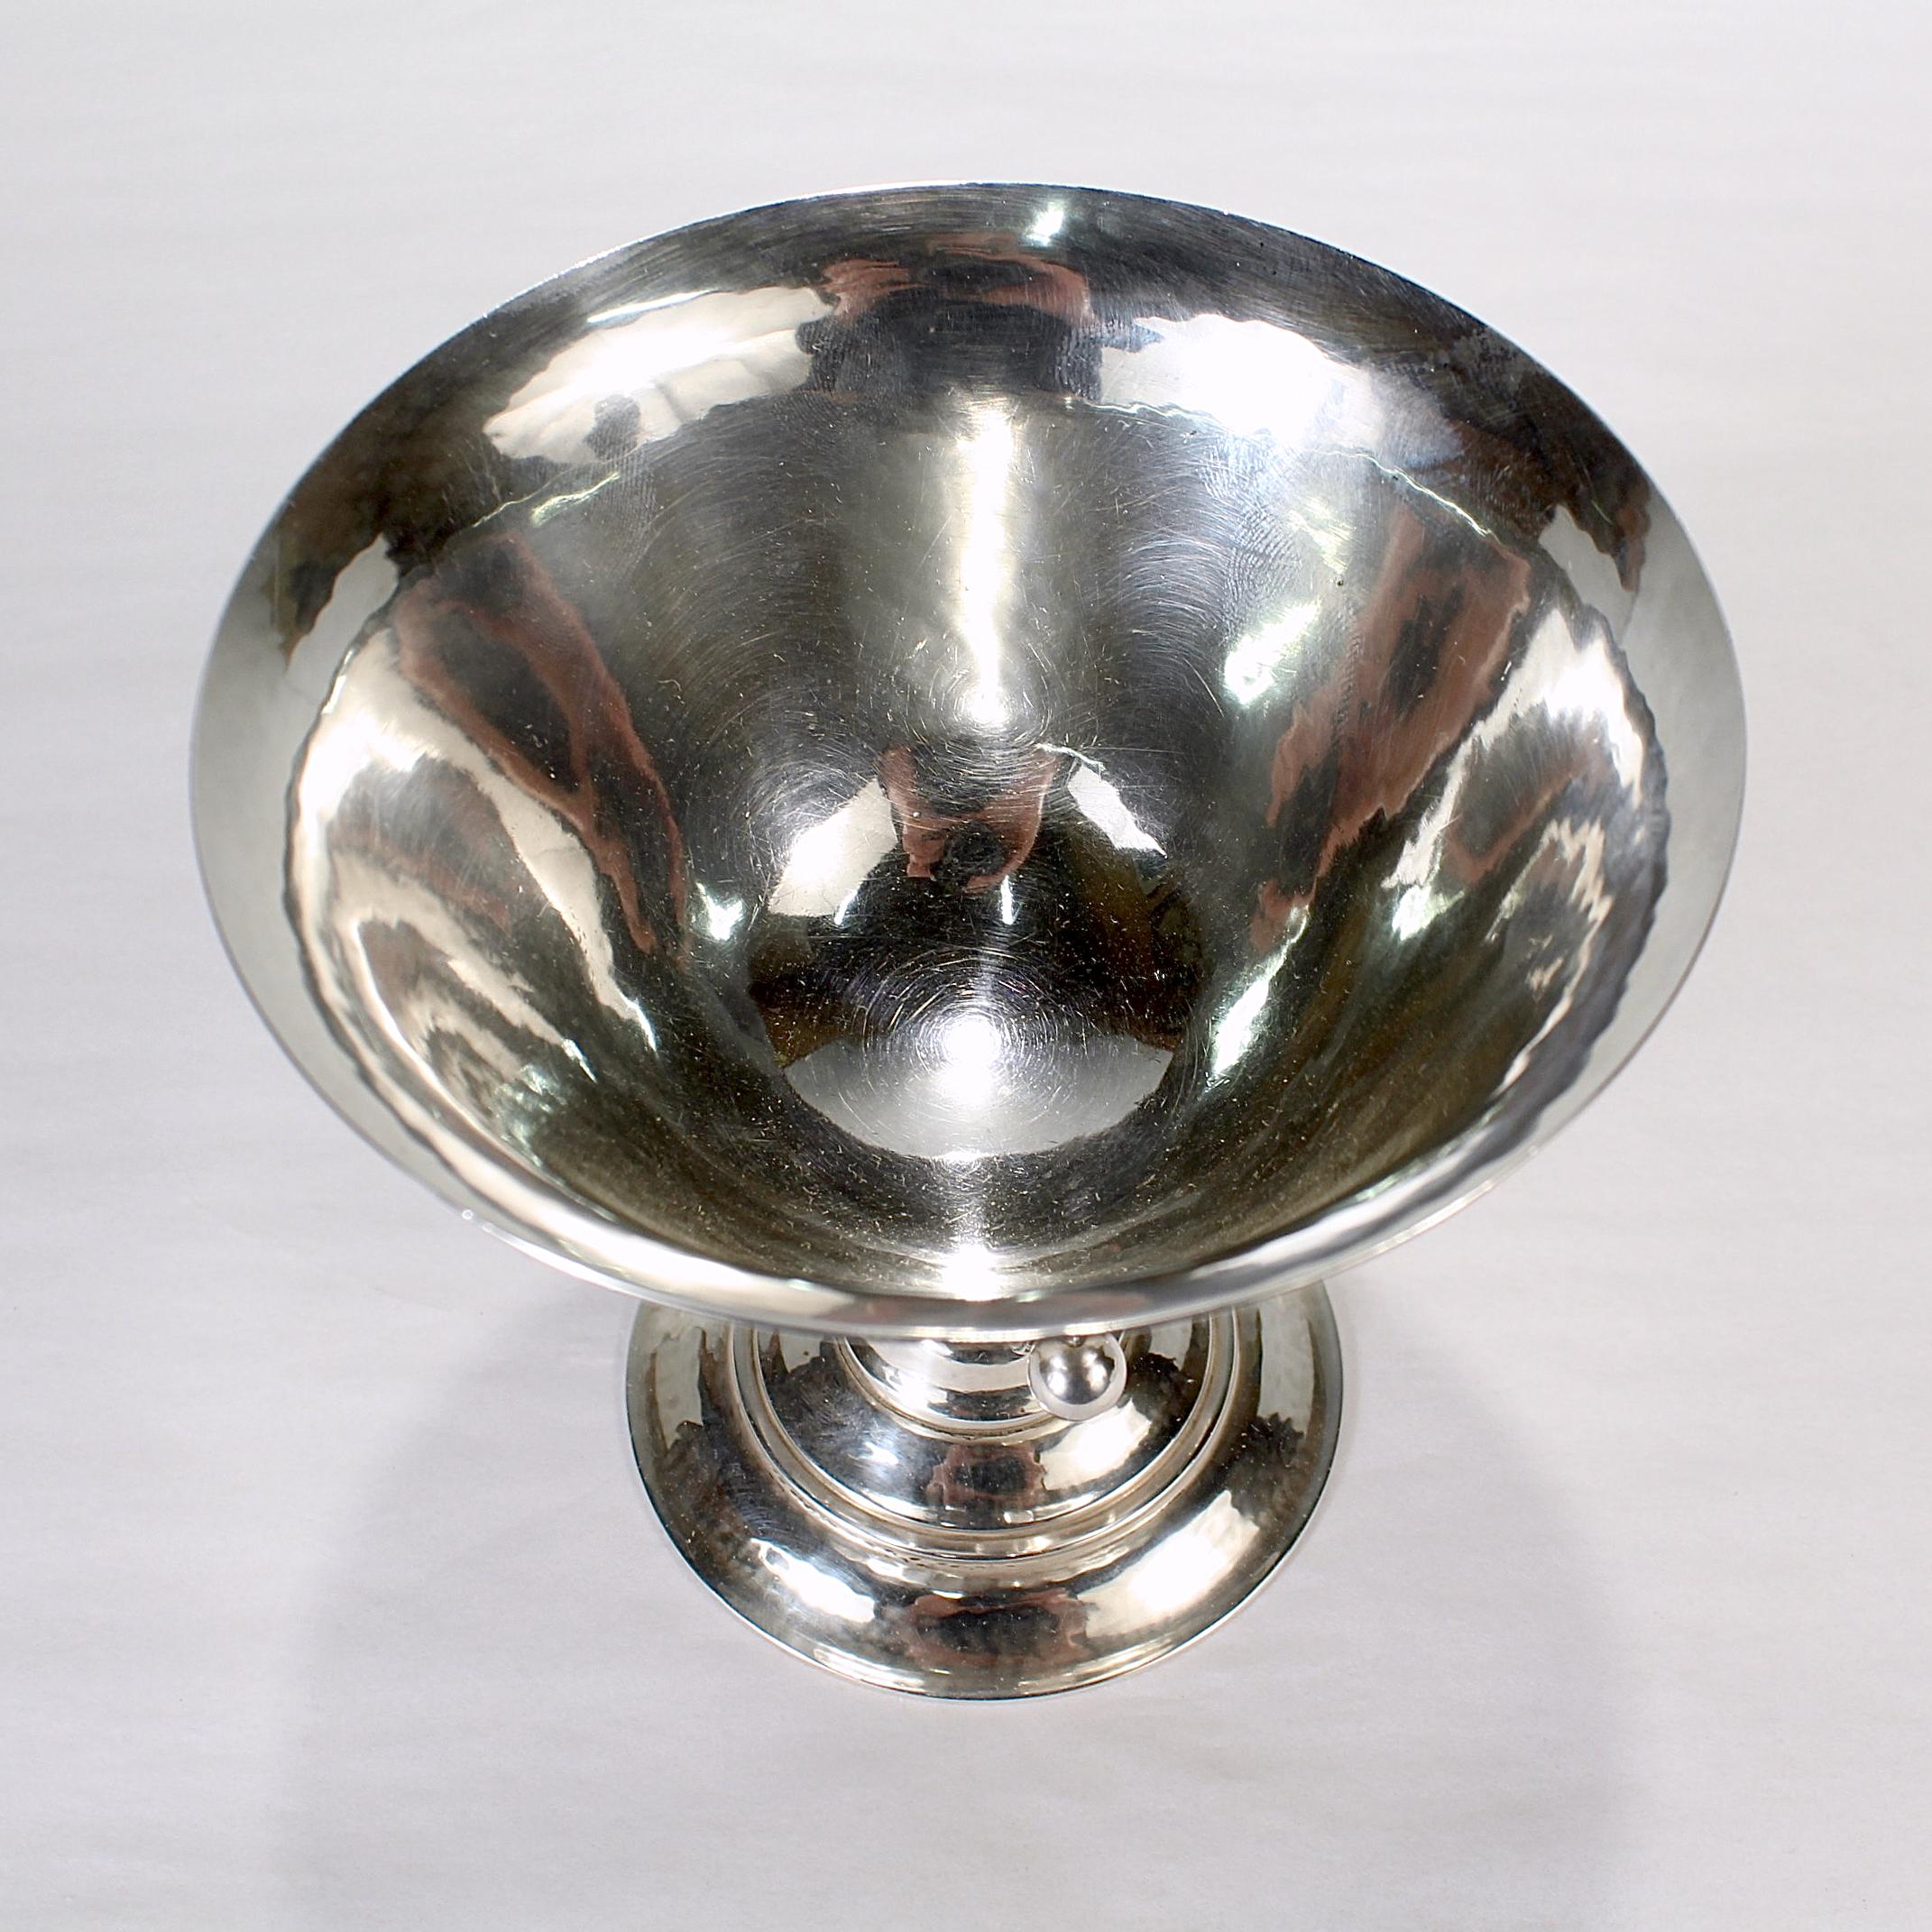 Art Deco Period Georg Jensen Sterling Silver Footed Bowl by Johan Rohde For Sale 1